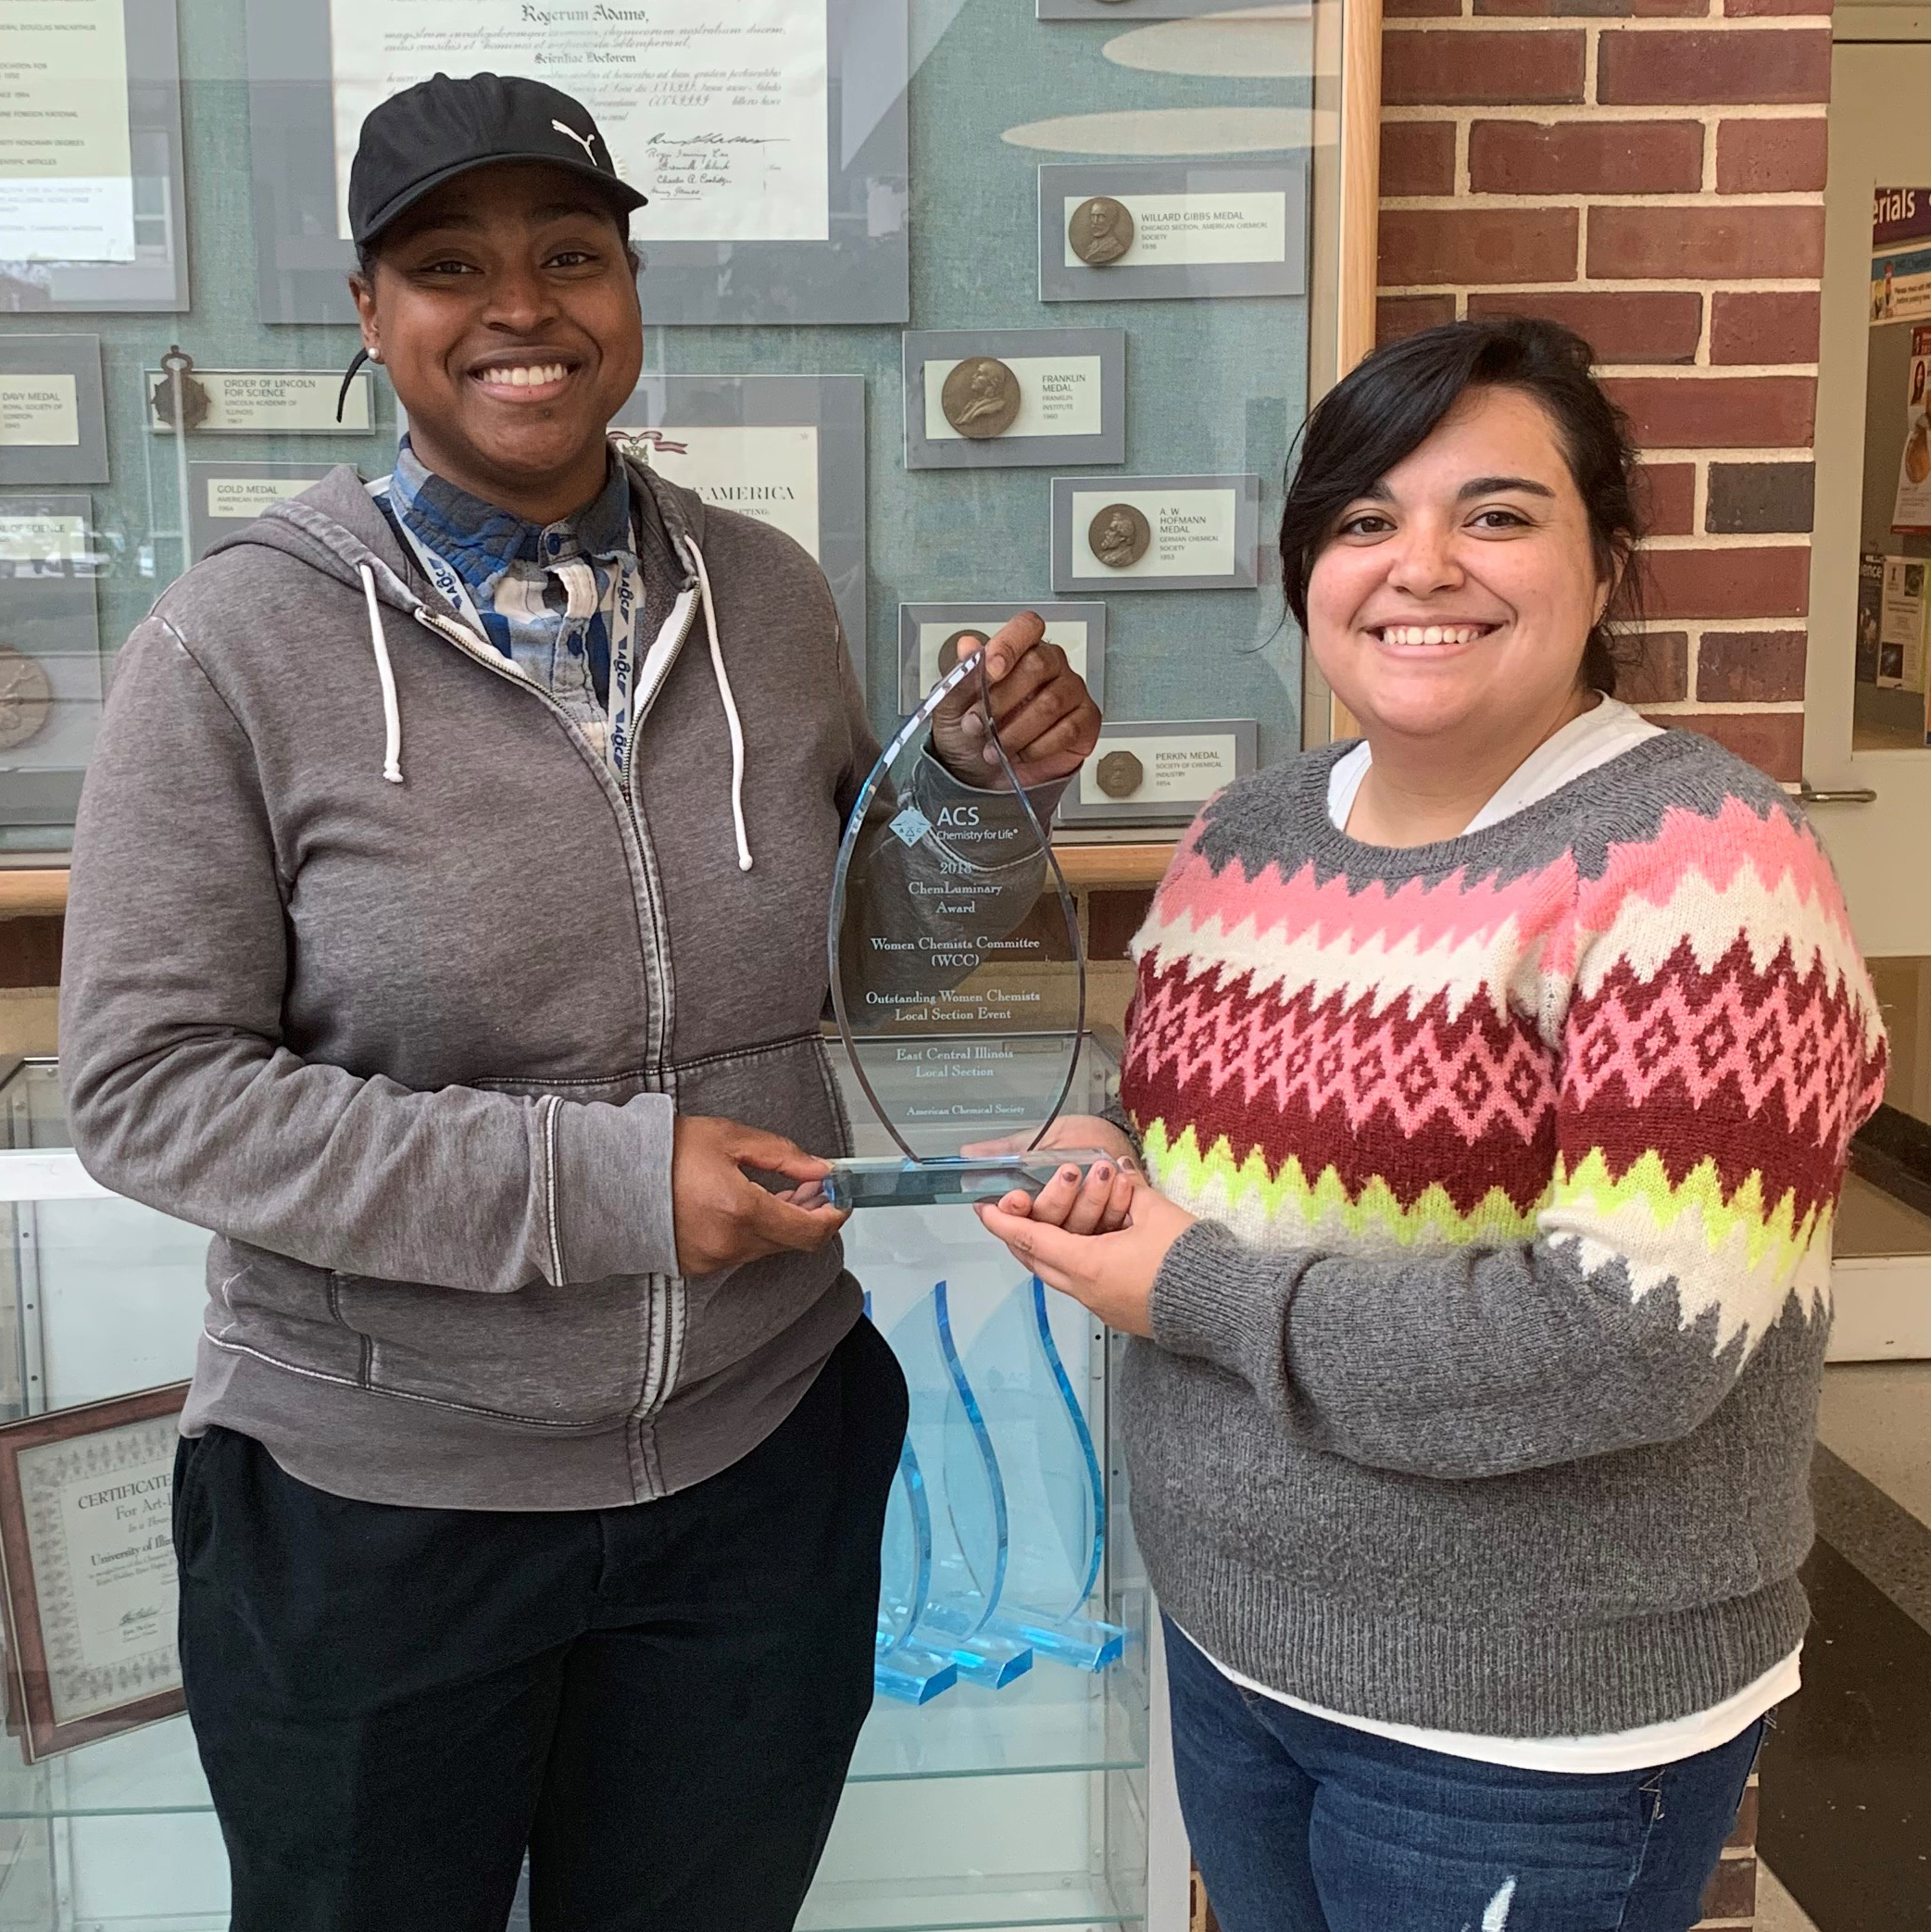 Safiyah Muhammad and Tabitha Miller, WCC board members and co-chairs for the 2018 Bonding with Chemistry day camp, pose with their award.